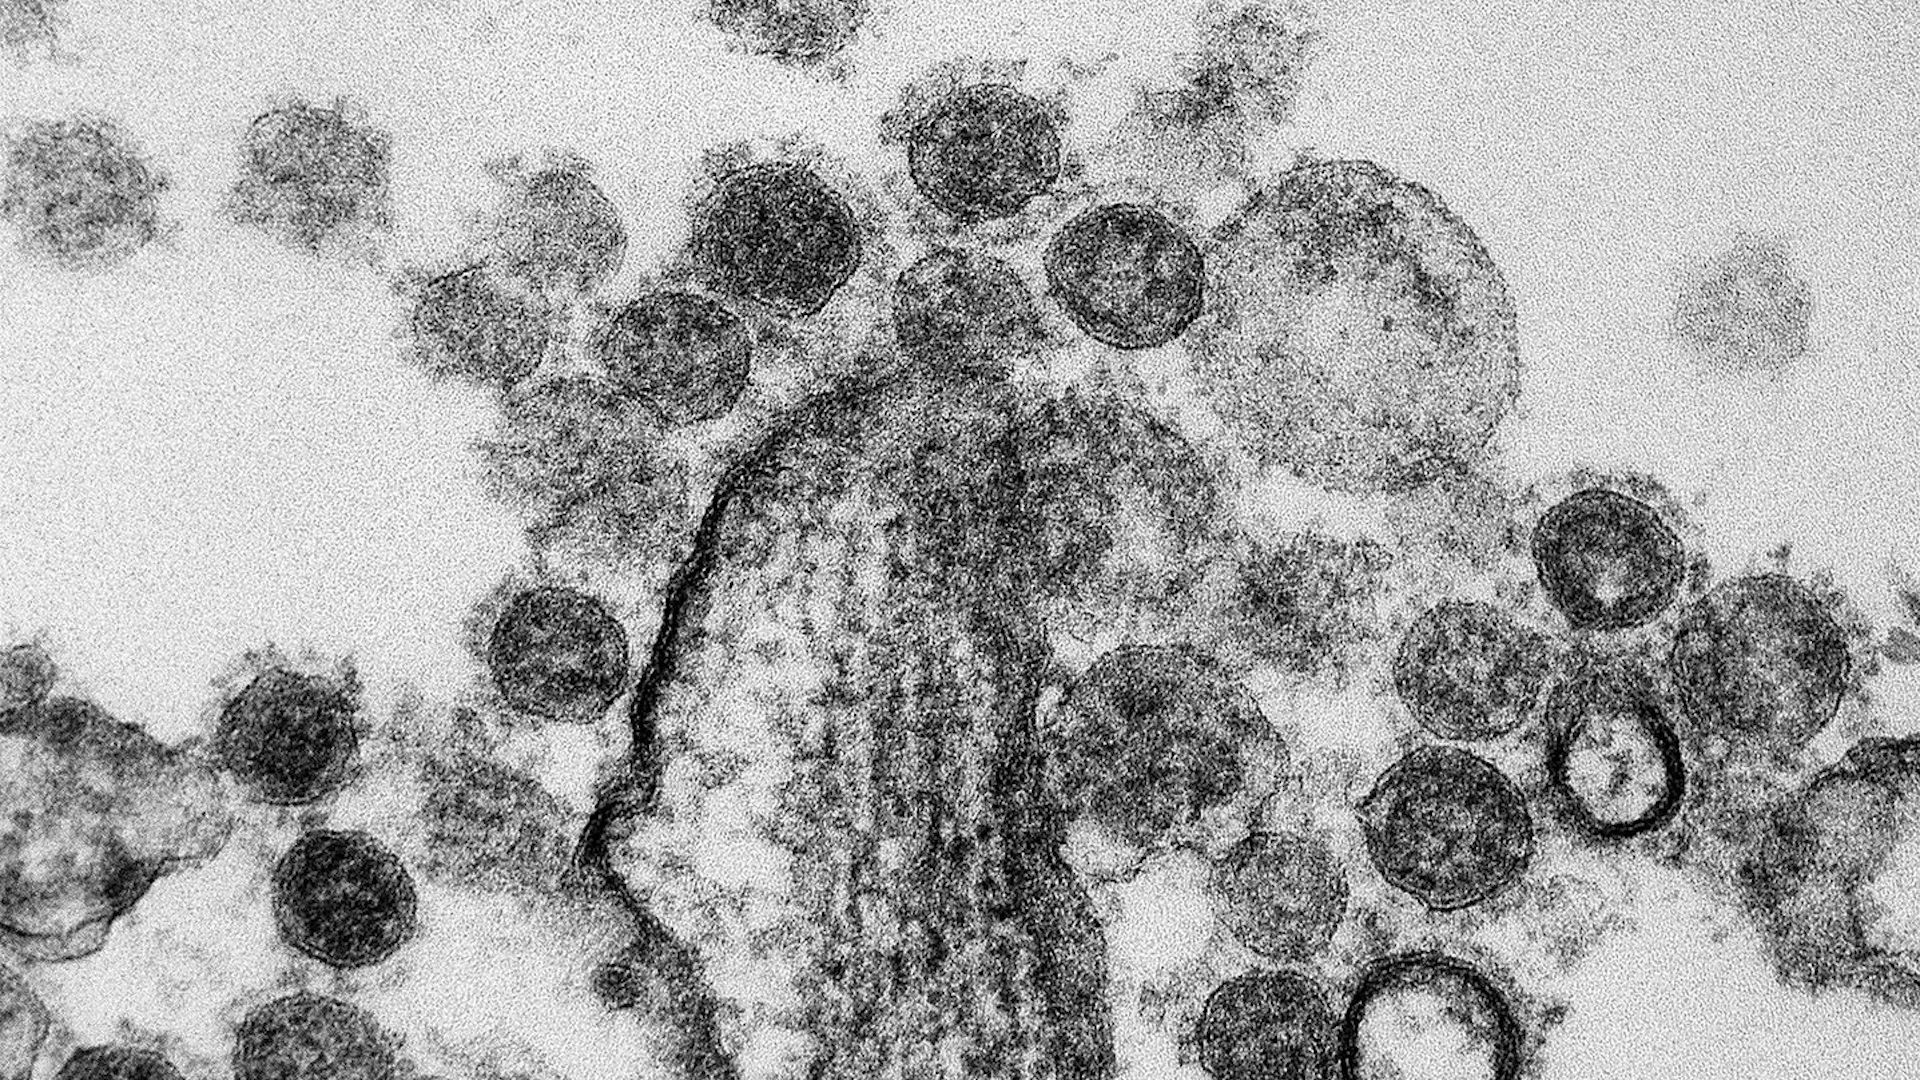 A black and white micrograph of coronavirus particles